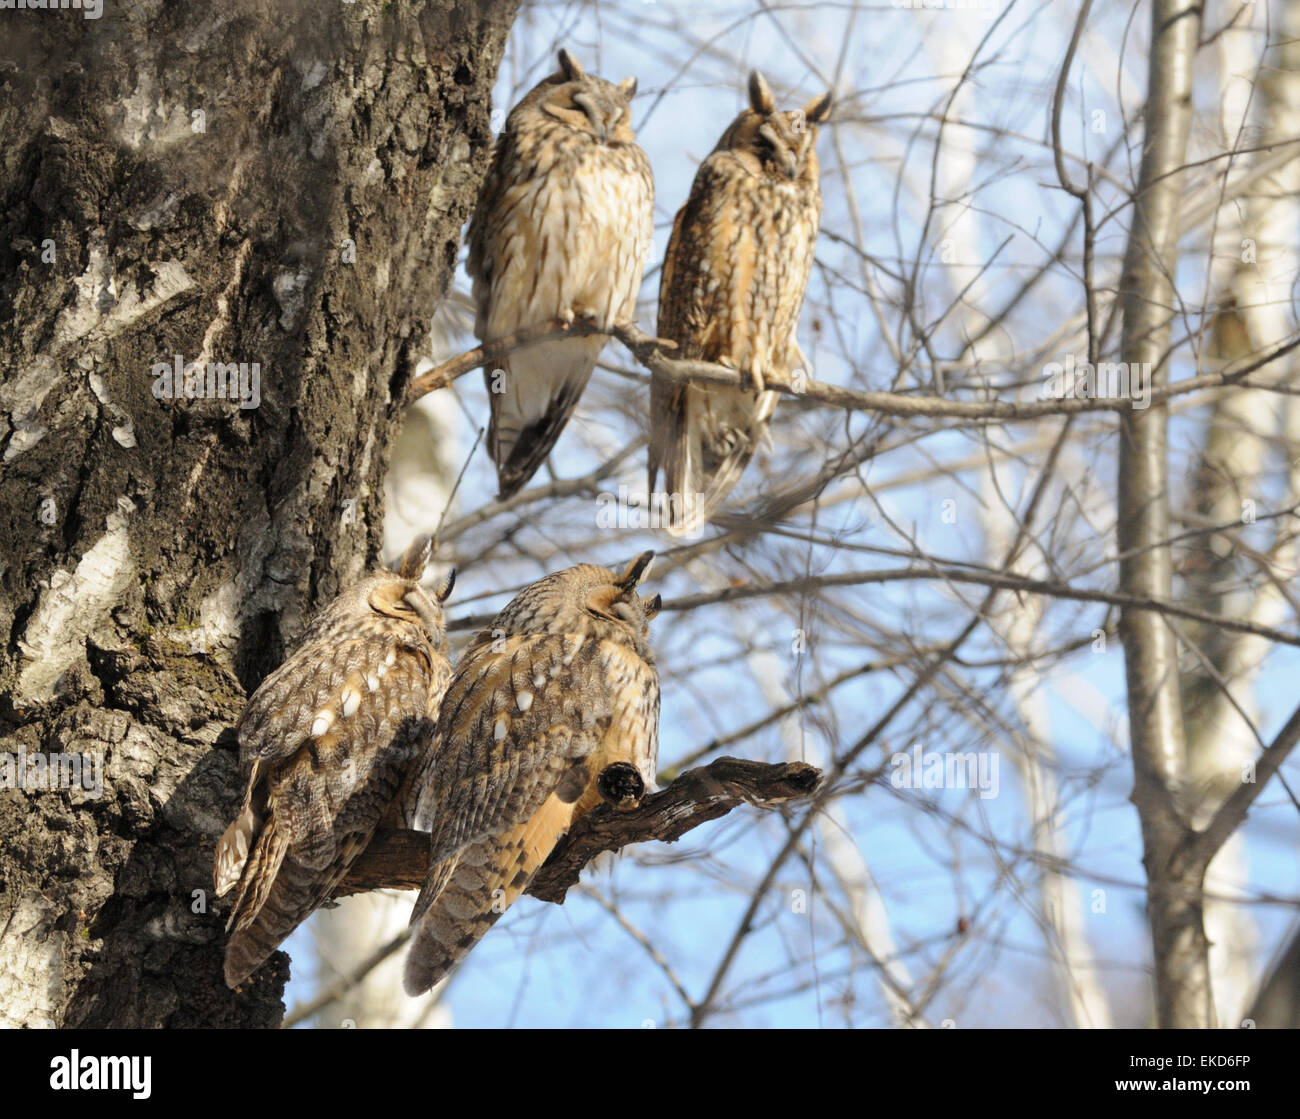 Four Long-eared Owls at the tree Stock Photo